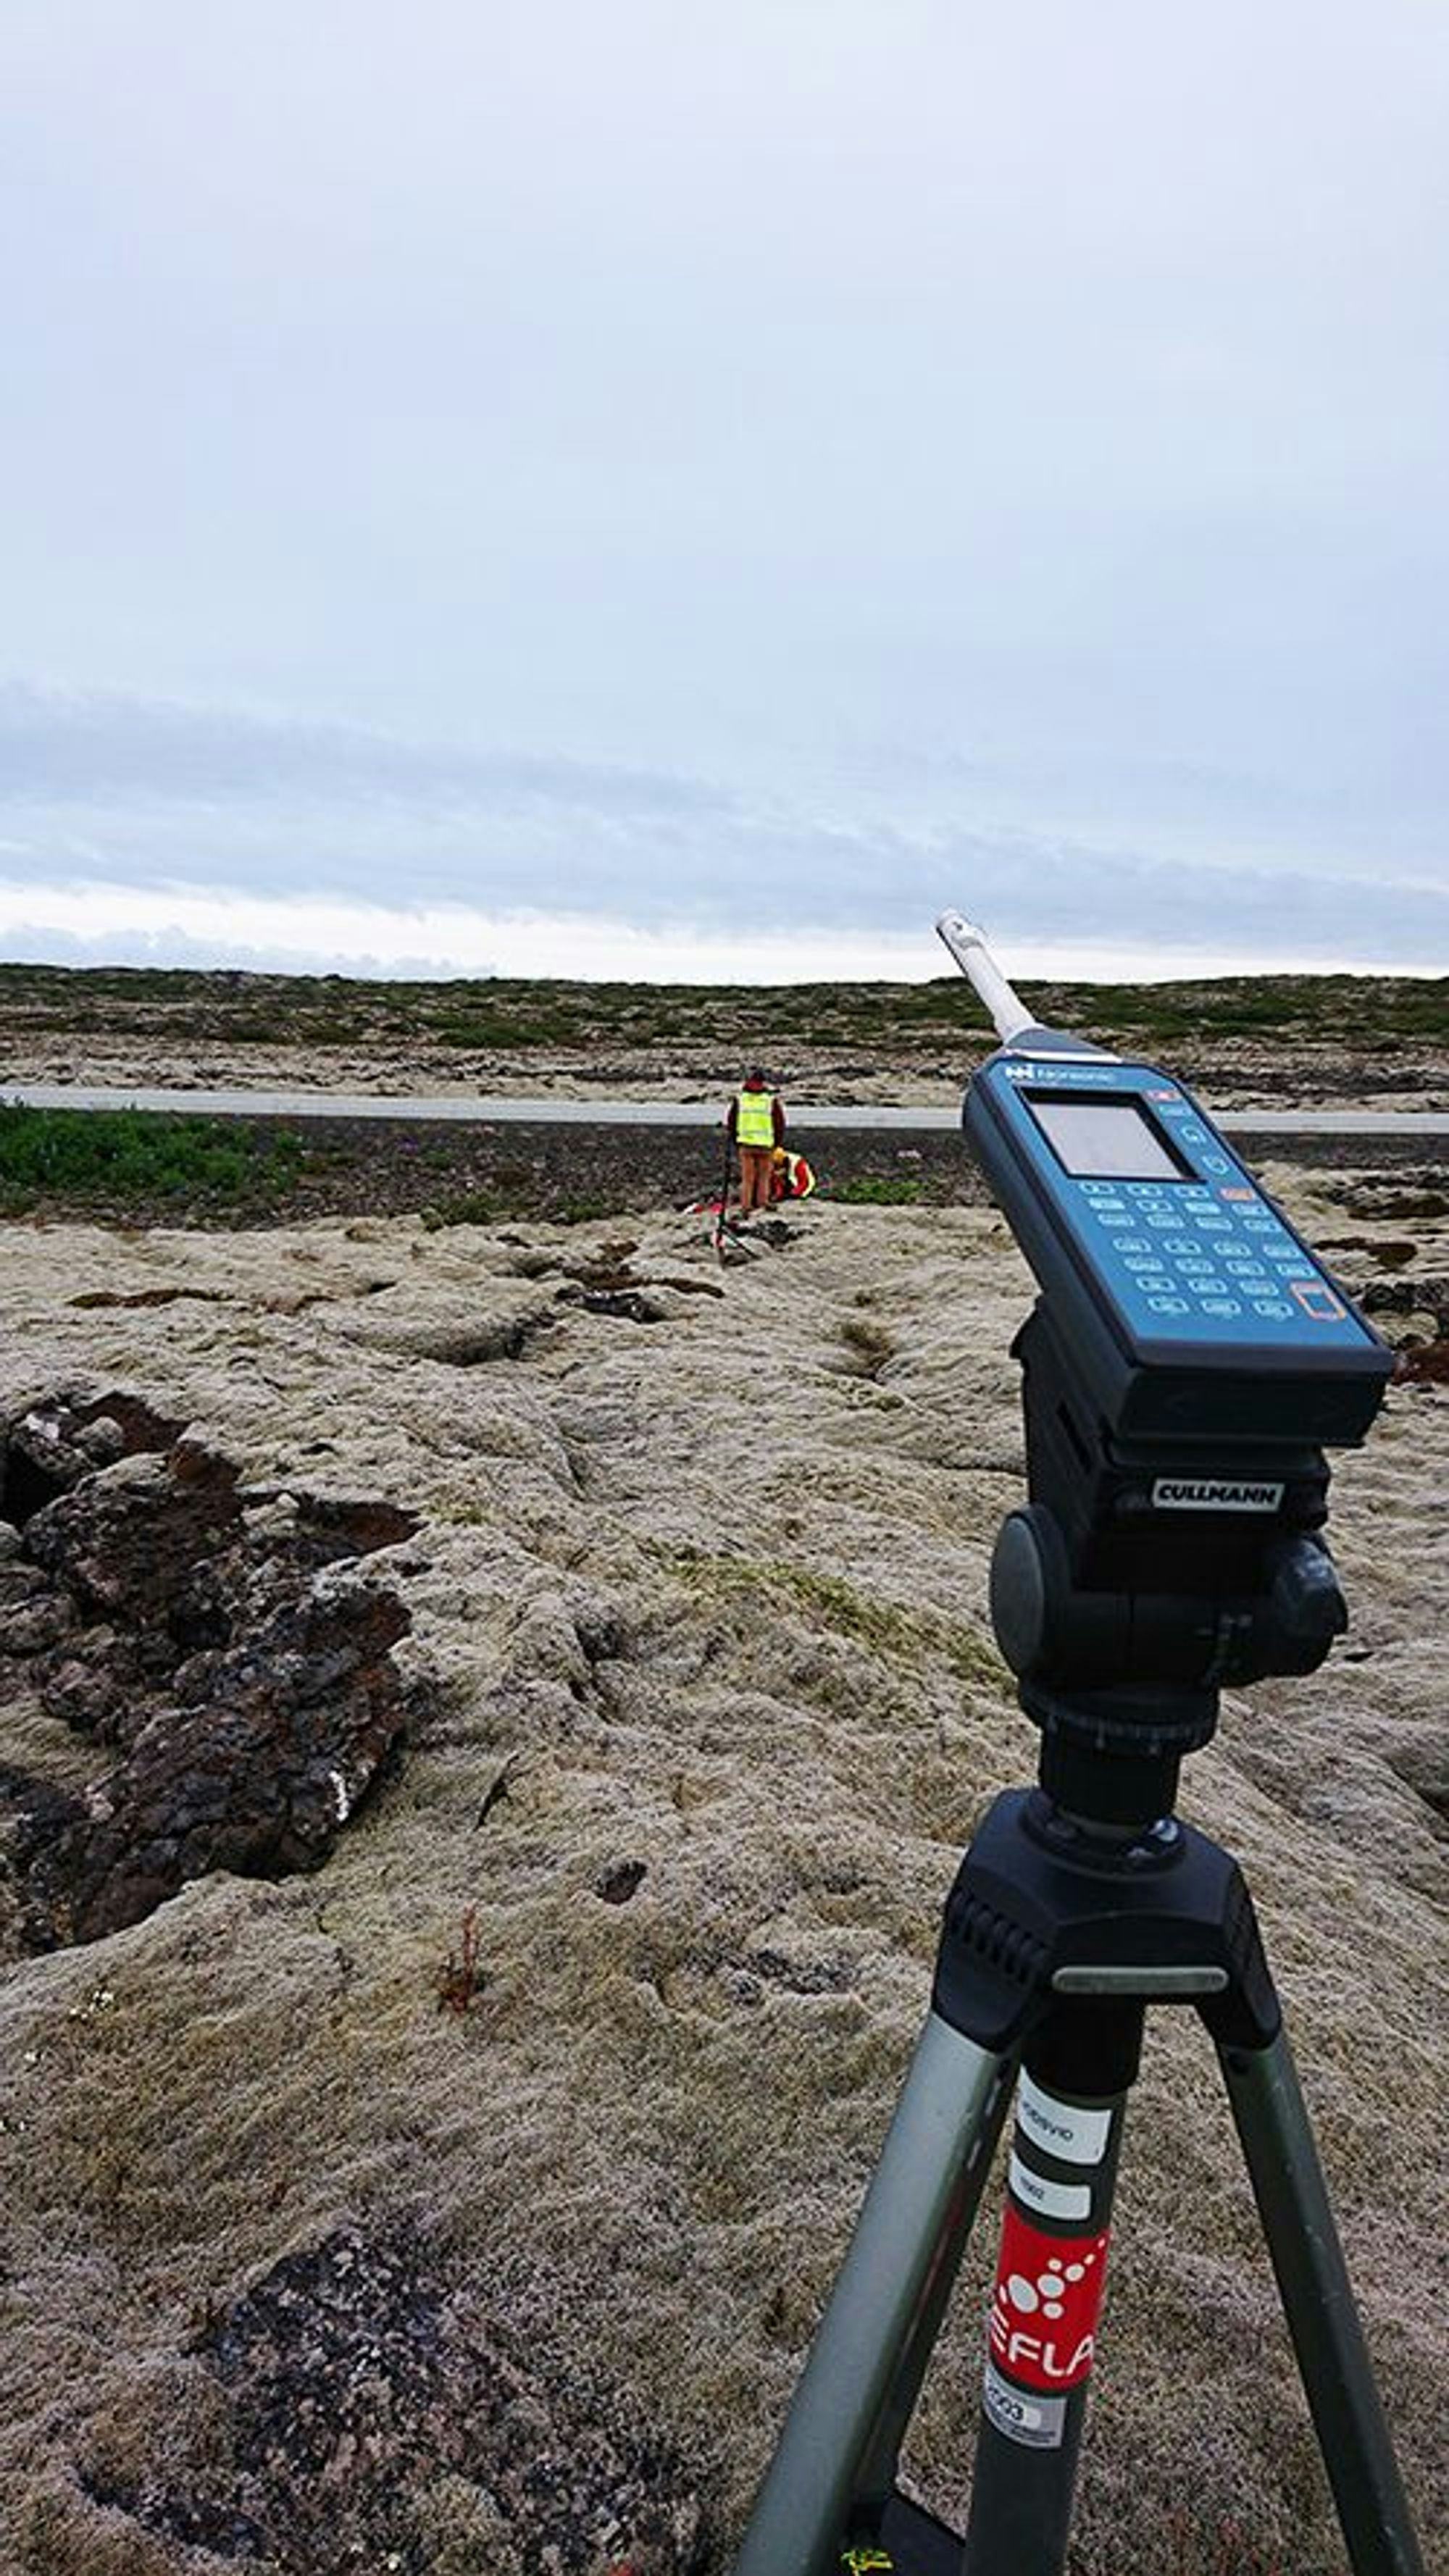 An image shows a device with buttons and a person working on a rocky terrain with sparse grass